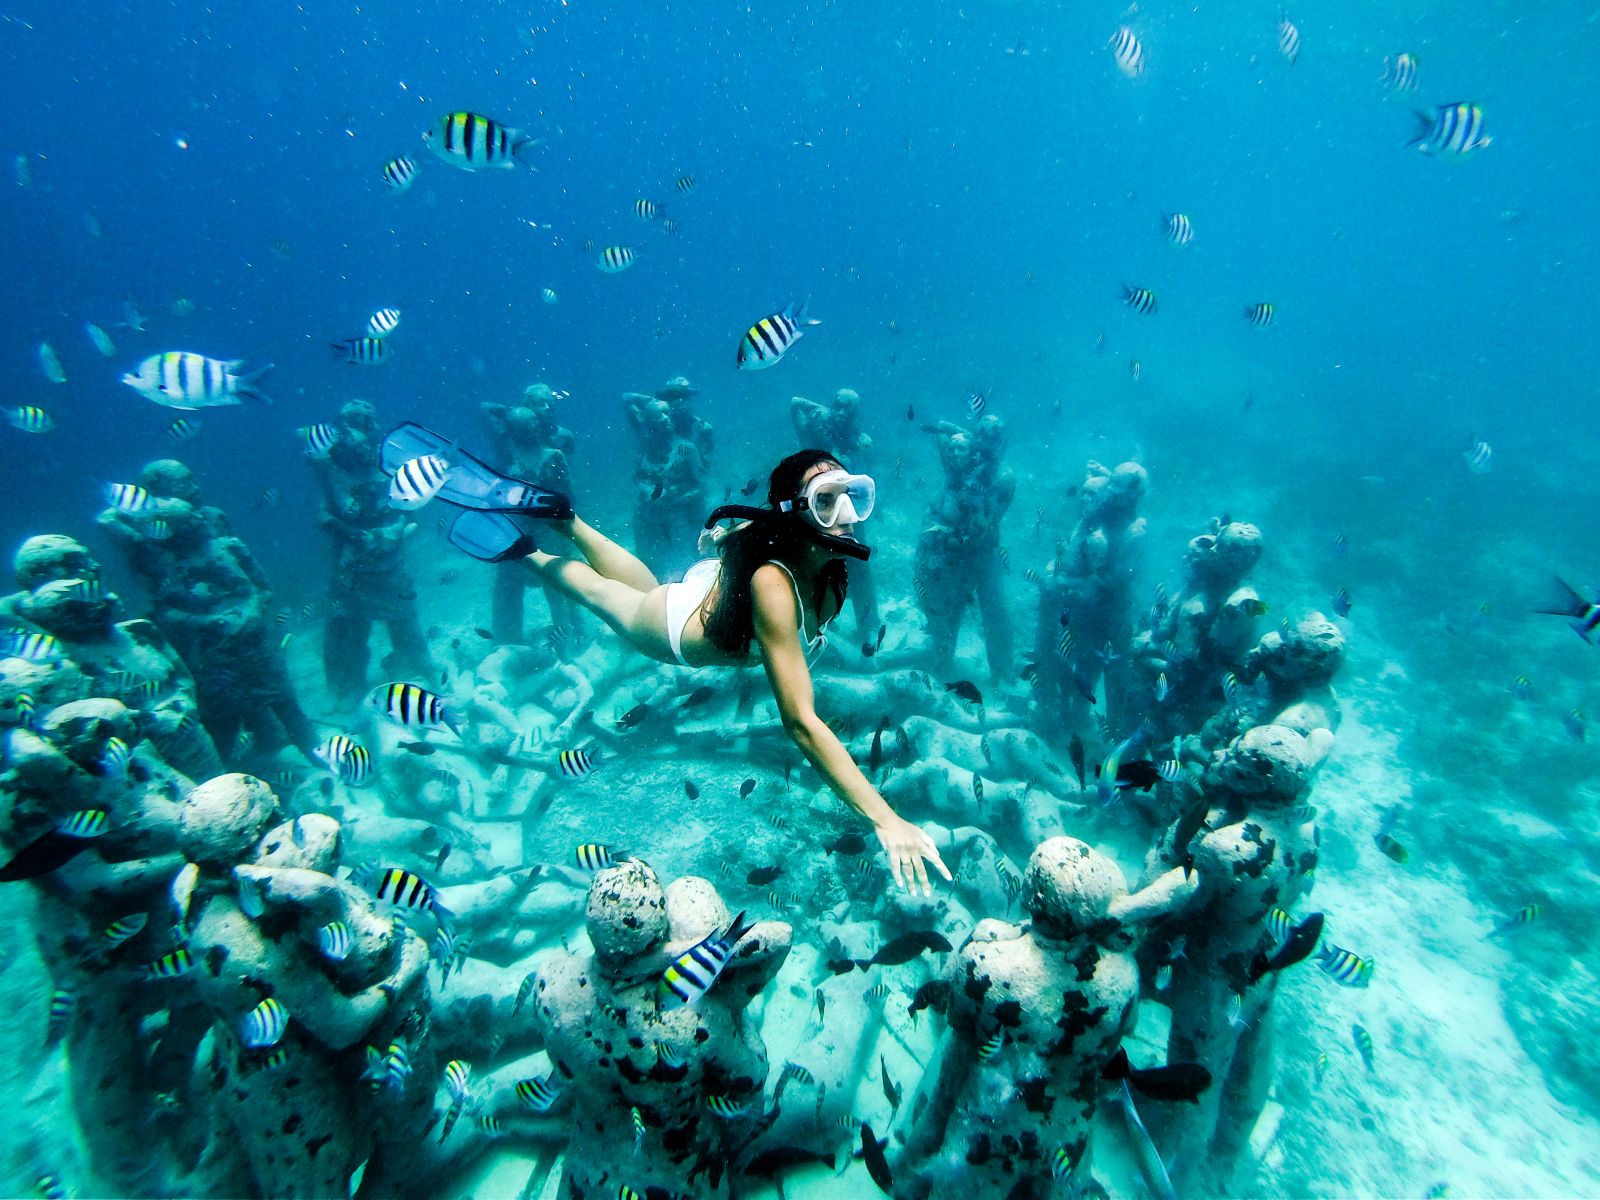 Snorkelling around the ruins of a submerged temple from the Gili Islands in Indonesia